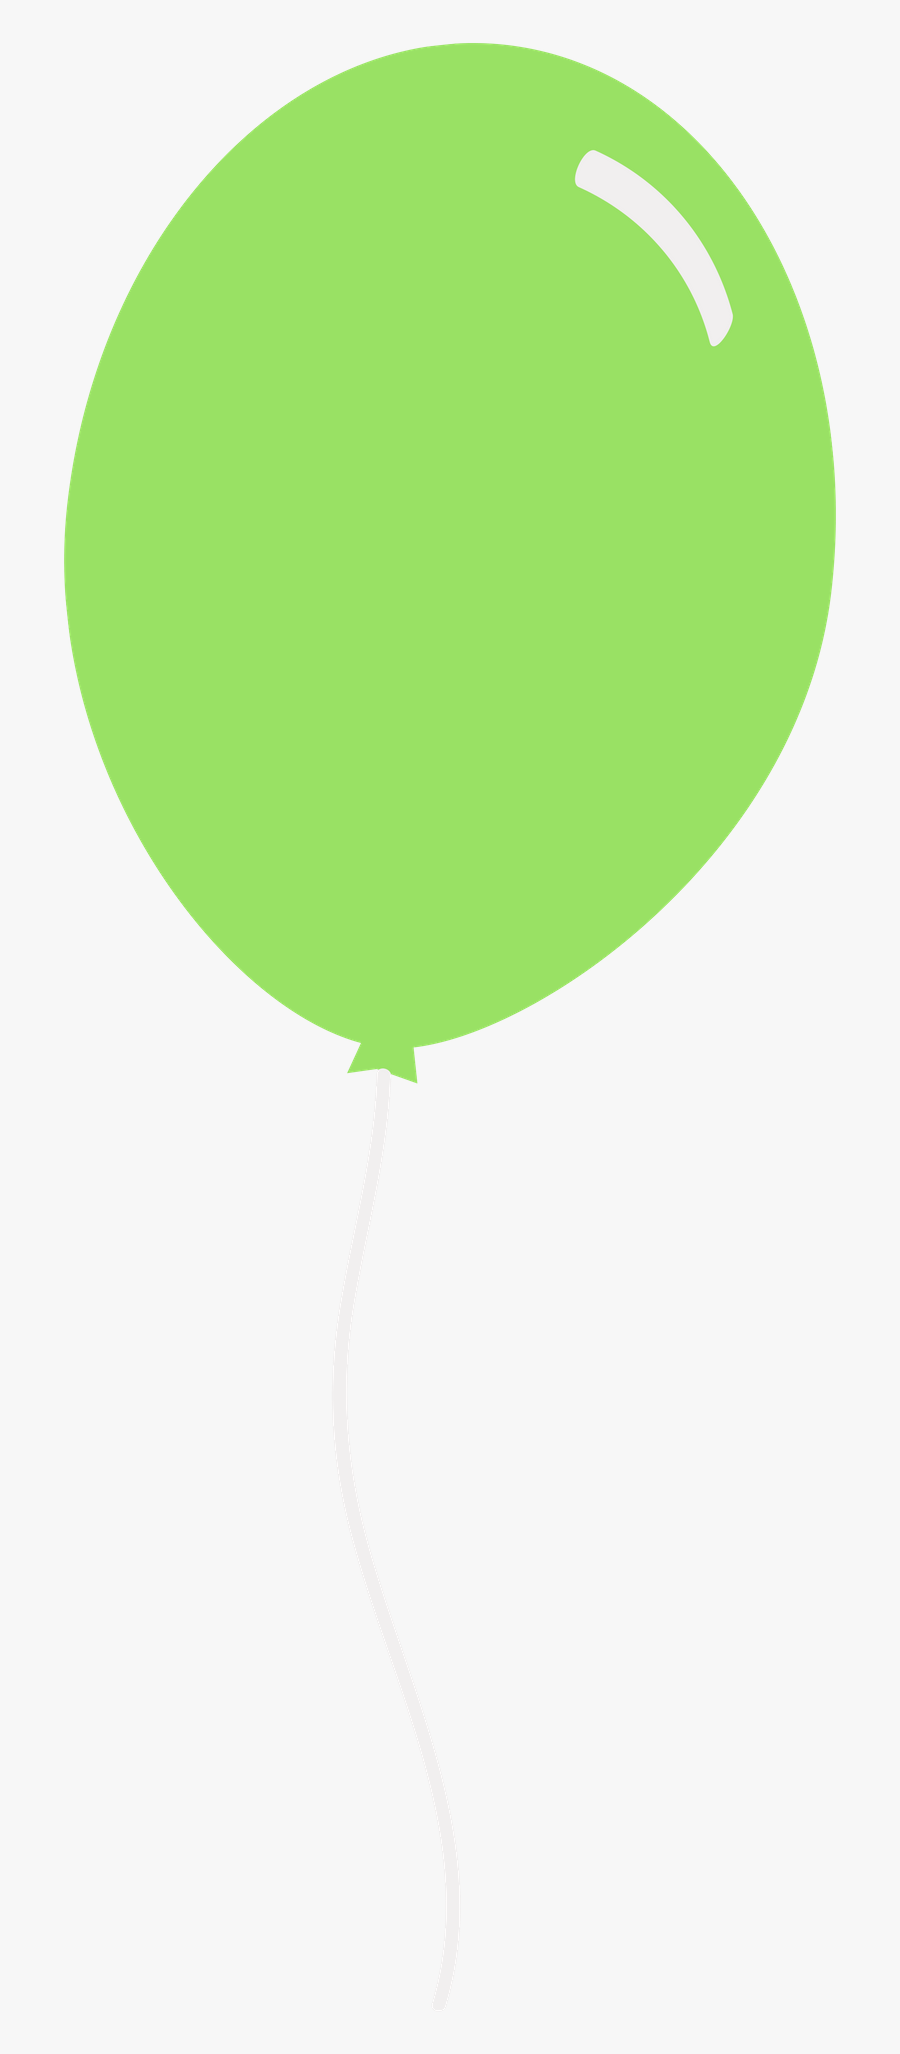 Balloon Png - Green Balloon Image Png, Transparent Clipart